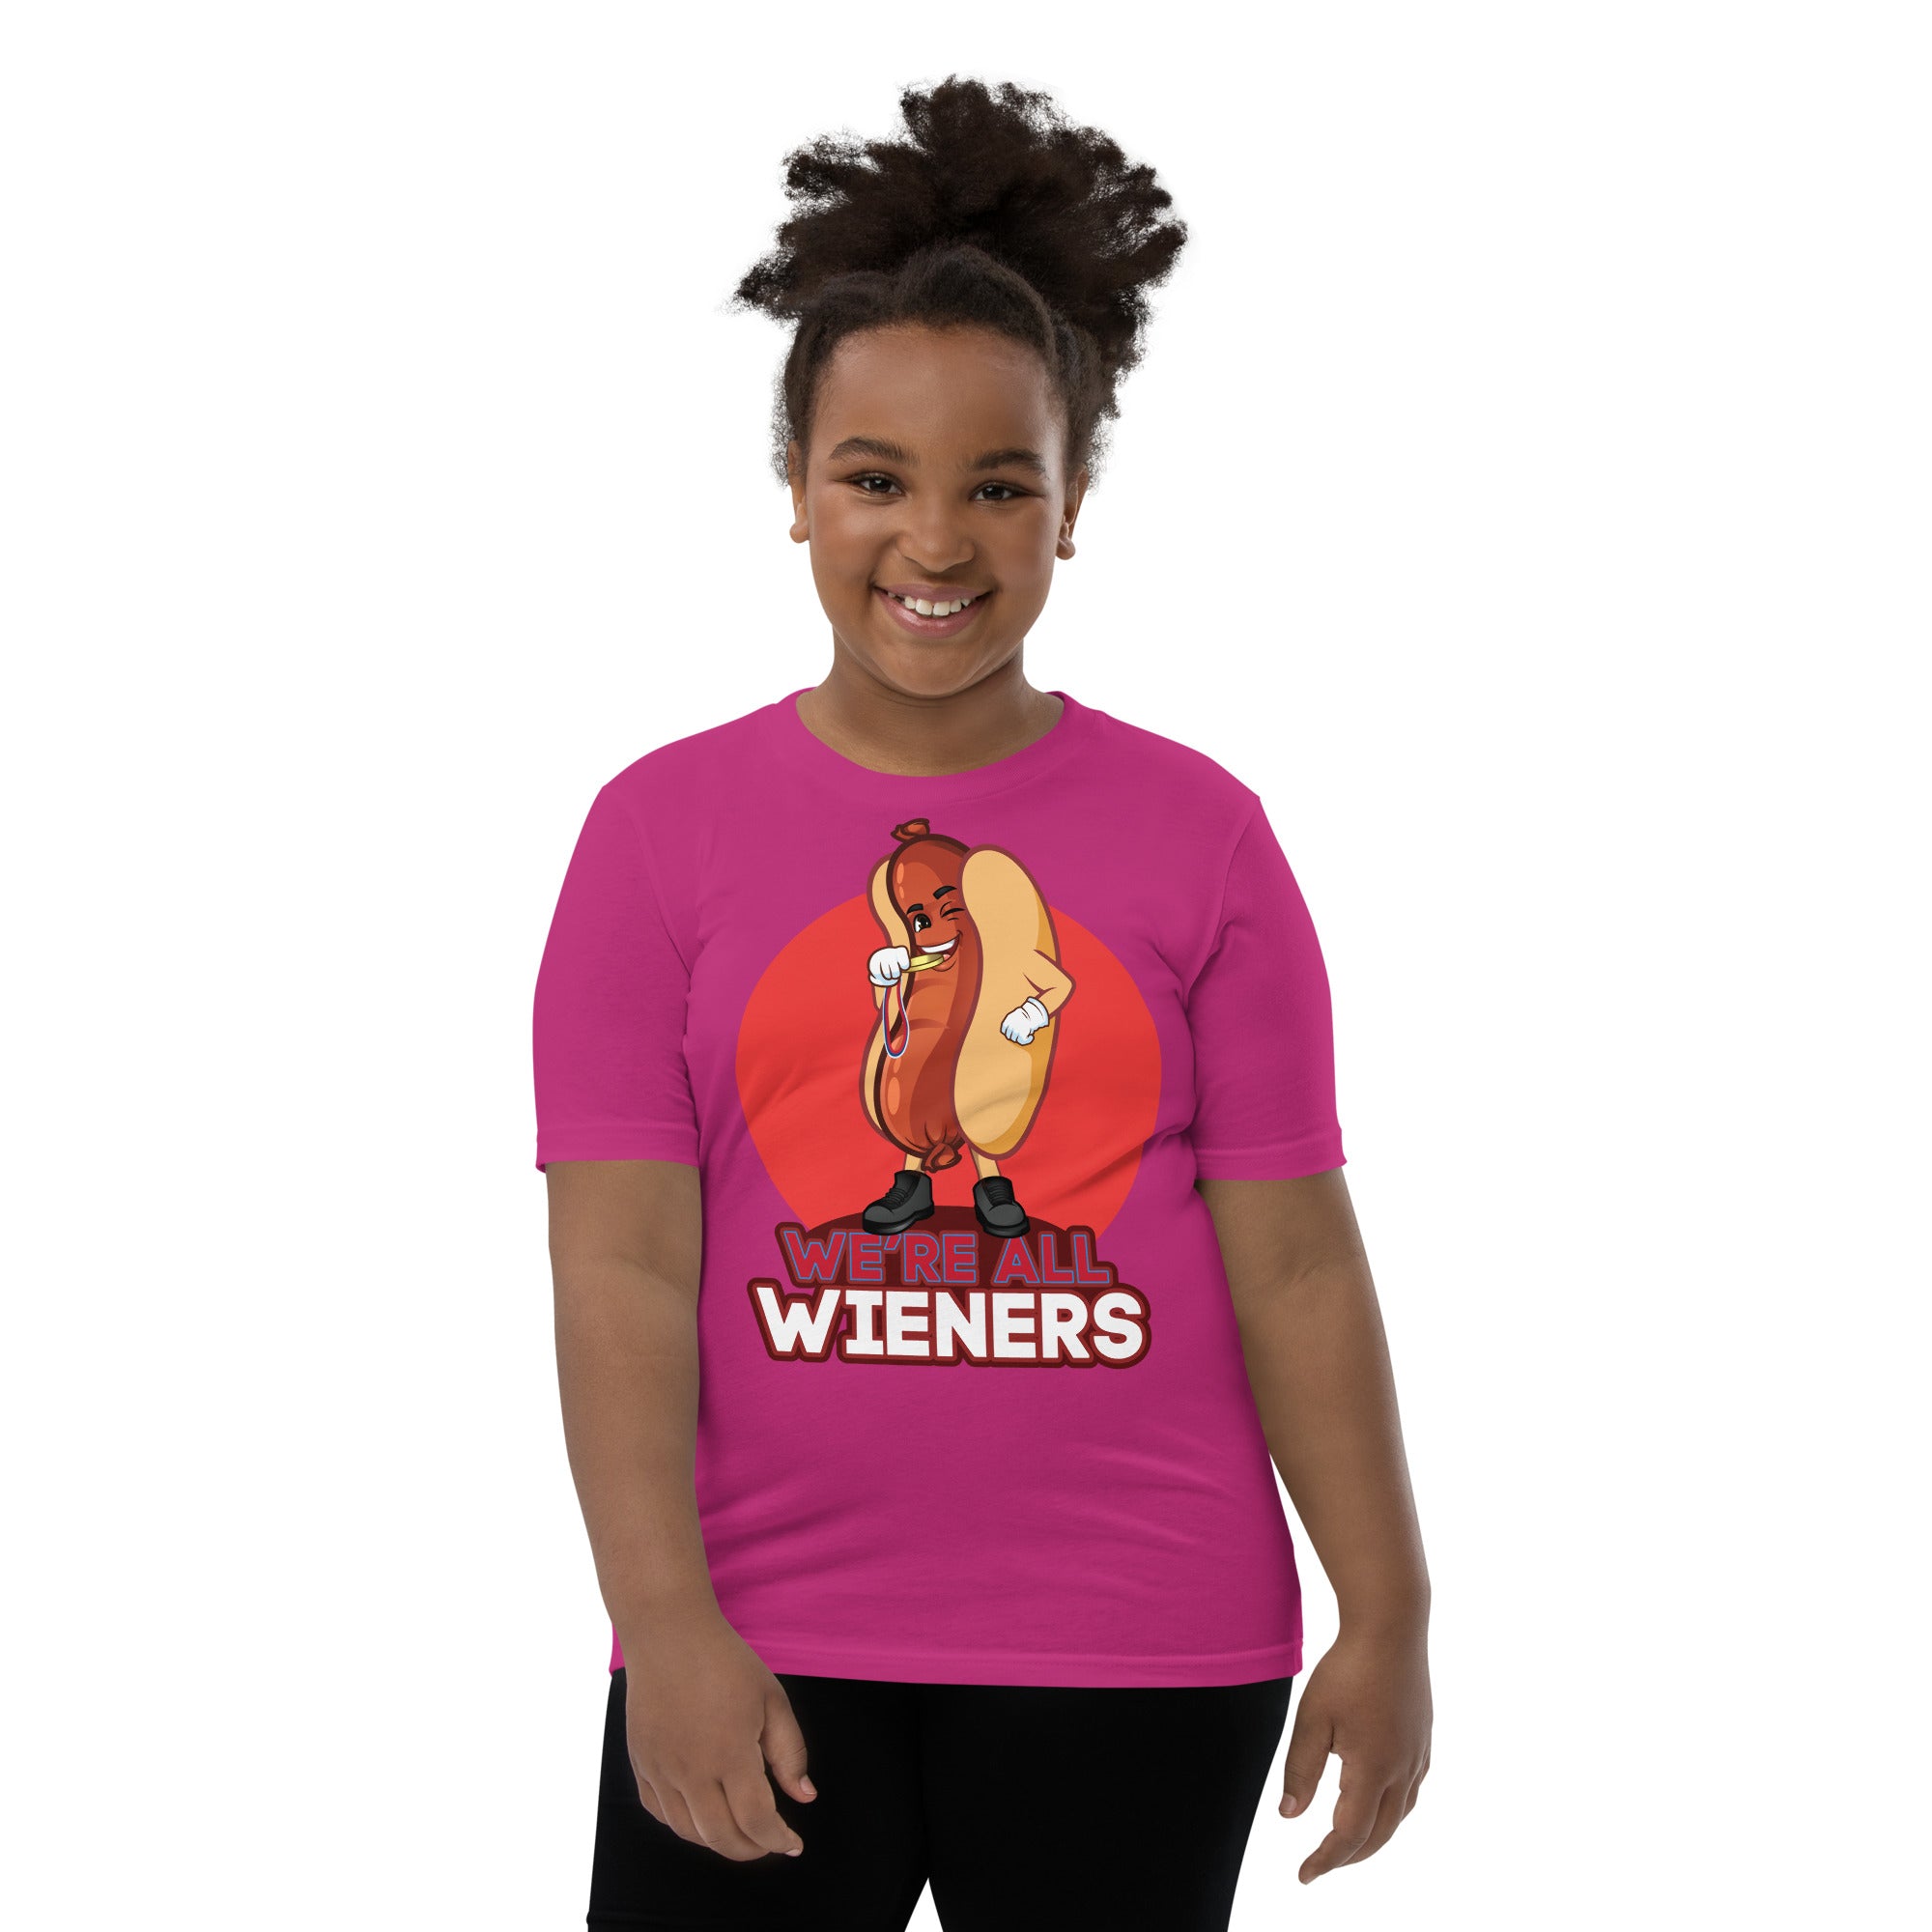 We're All Wieners - Youth Short Sleeve T-Shirt - Red